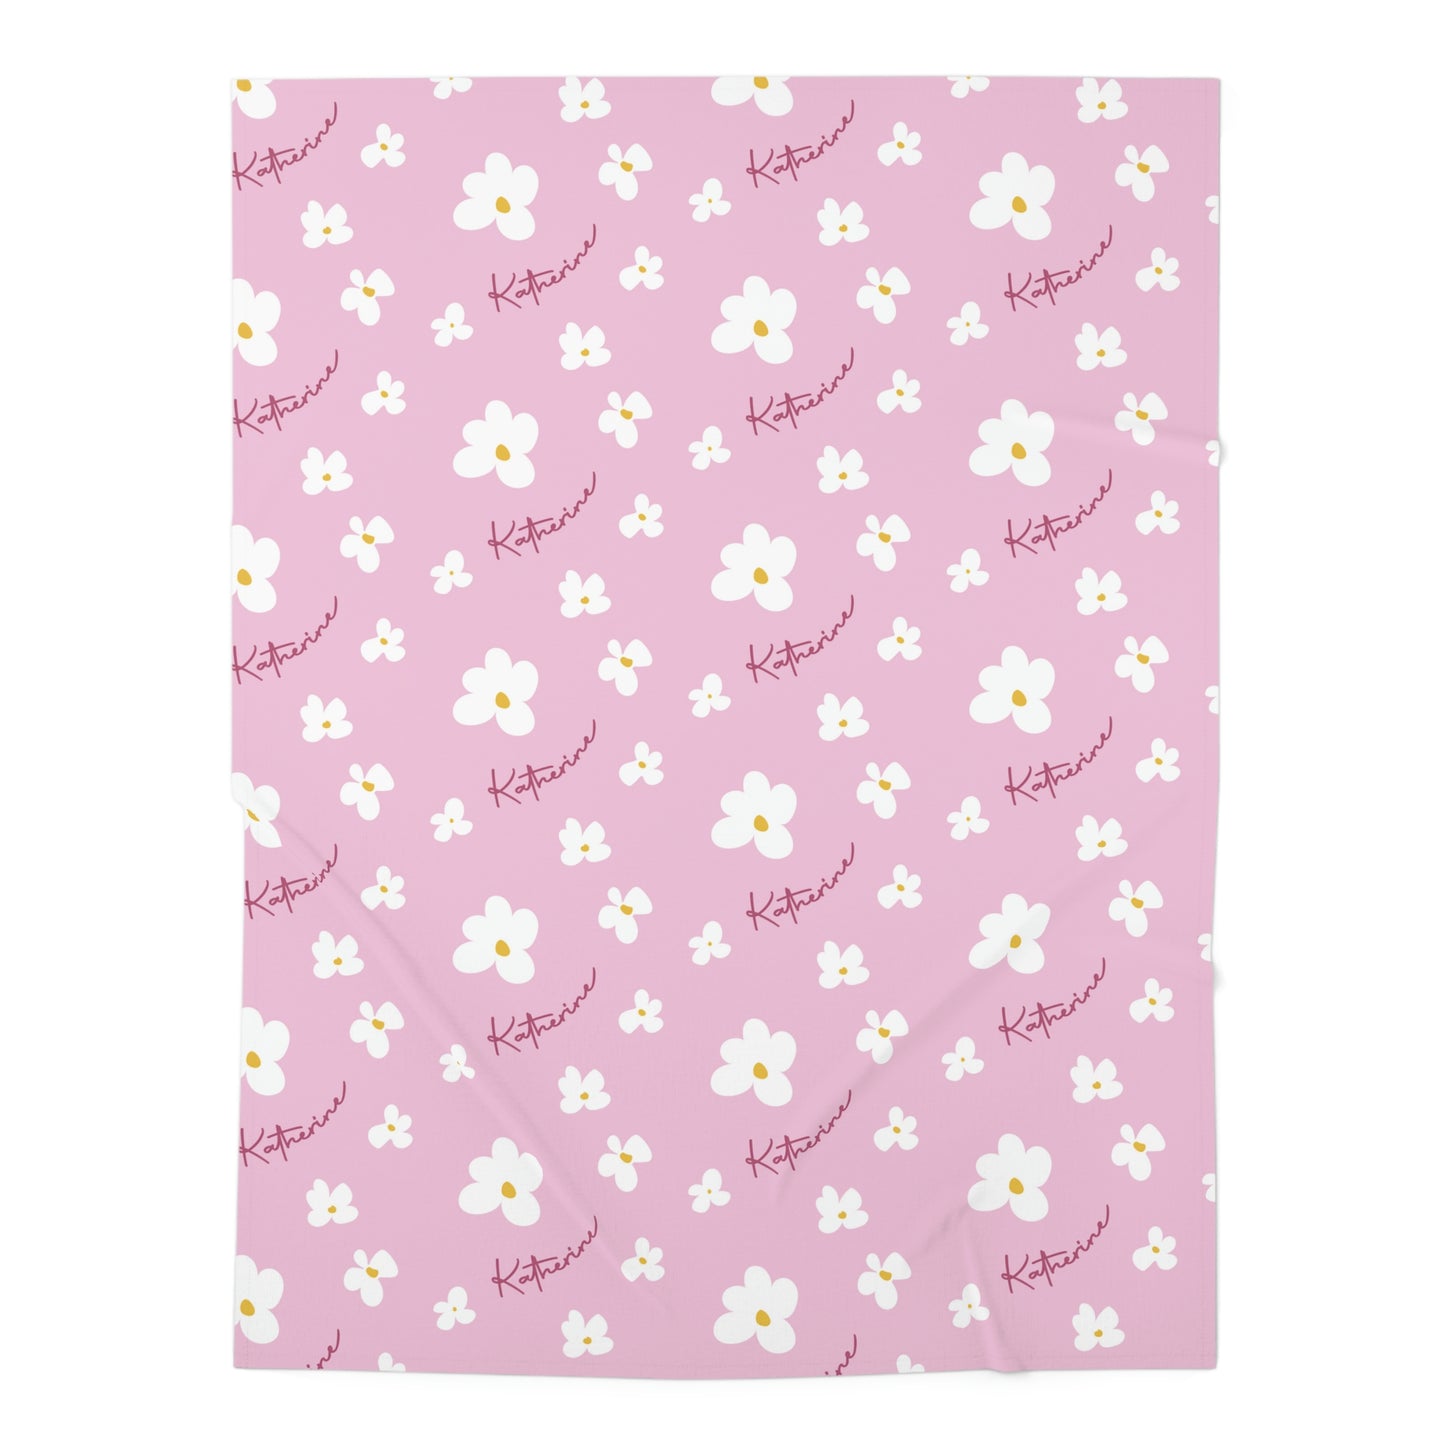 Jersey personalized baby blanket in pink daisy pattern laid flat